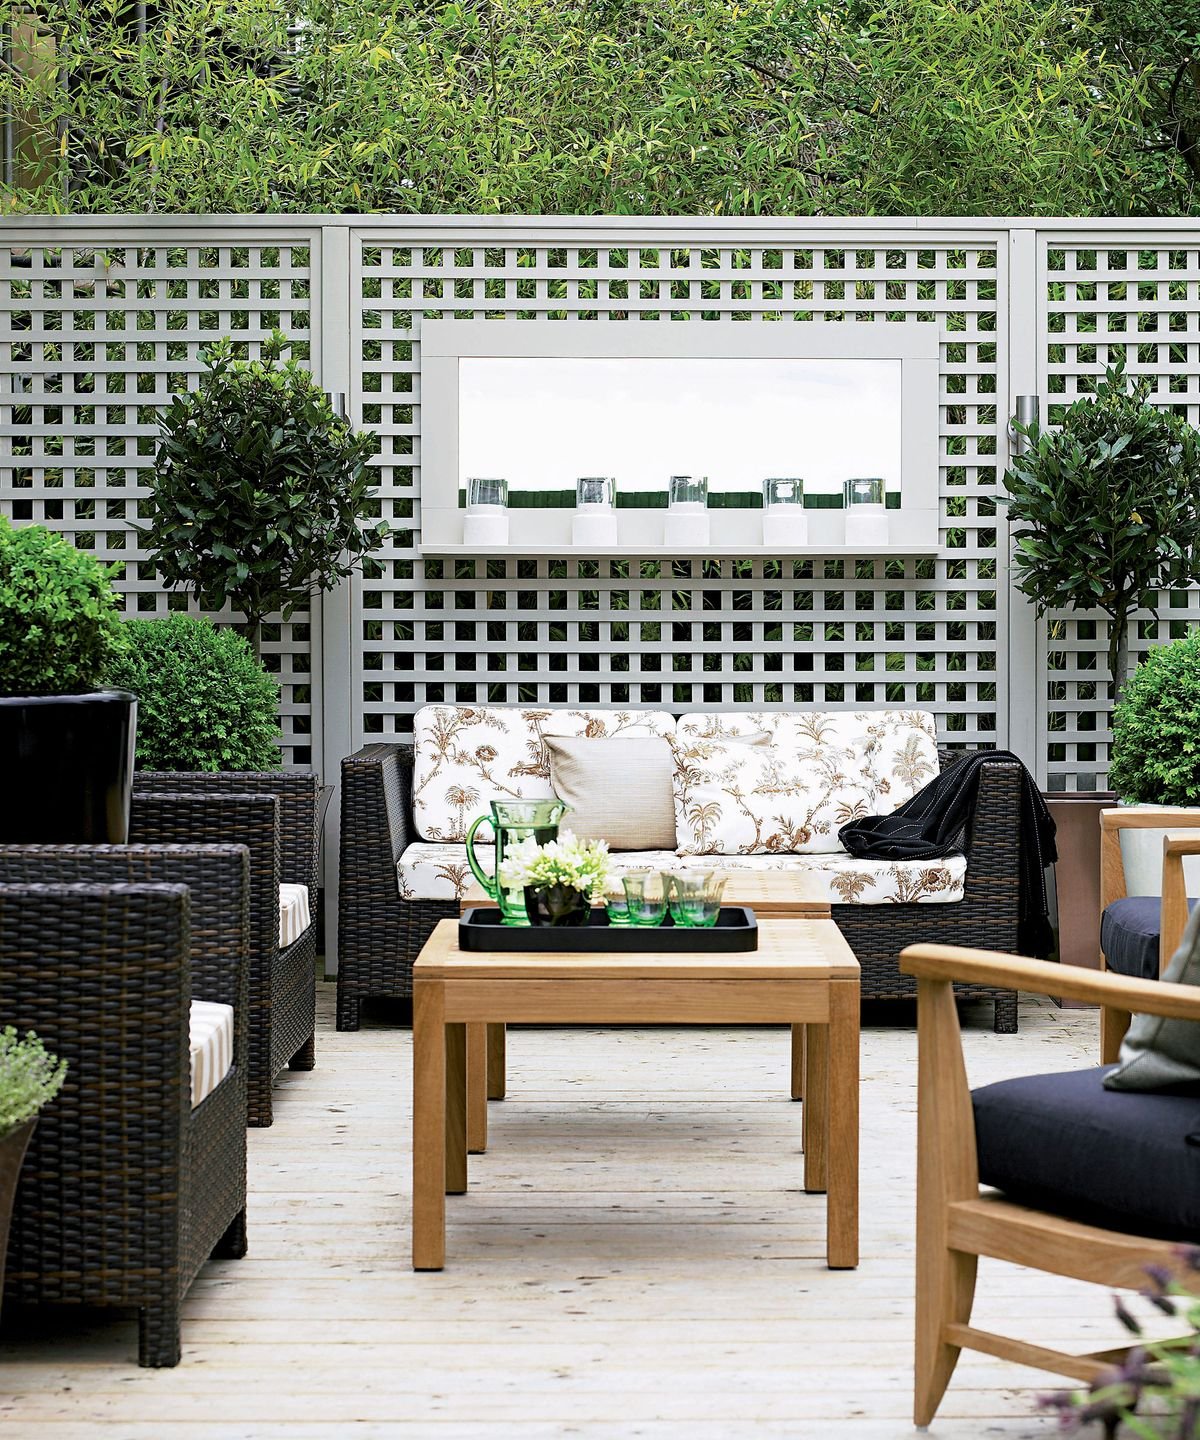 Maximise a compact gardening space with these small garden ideas